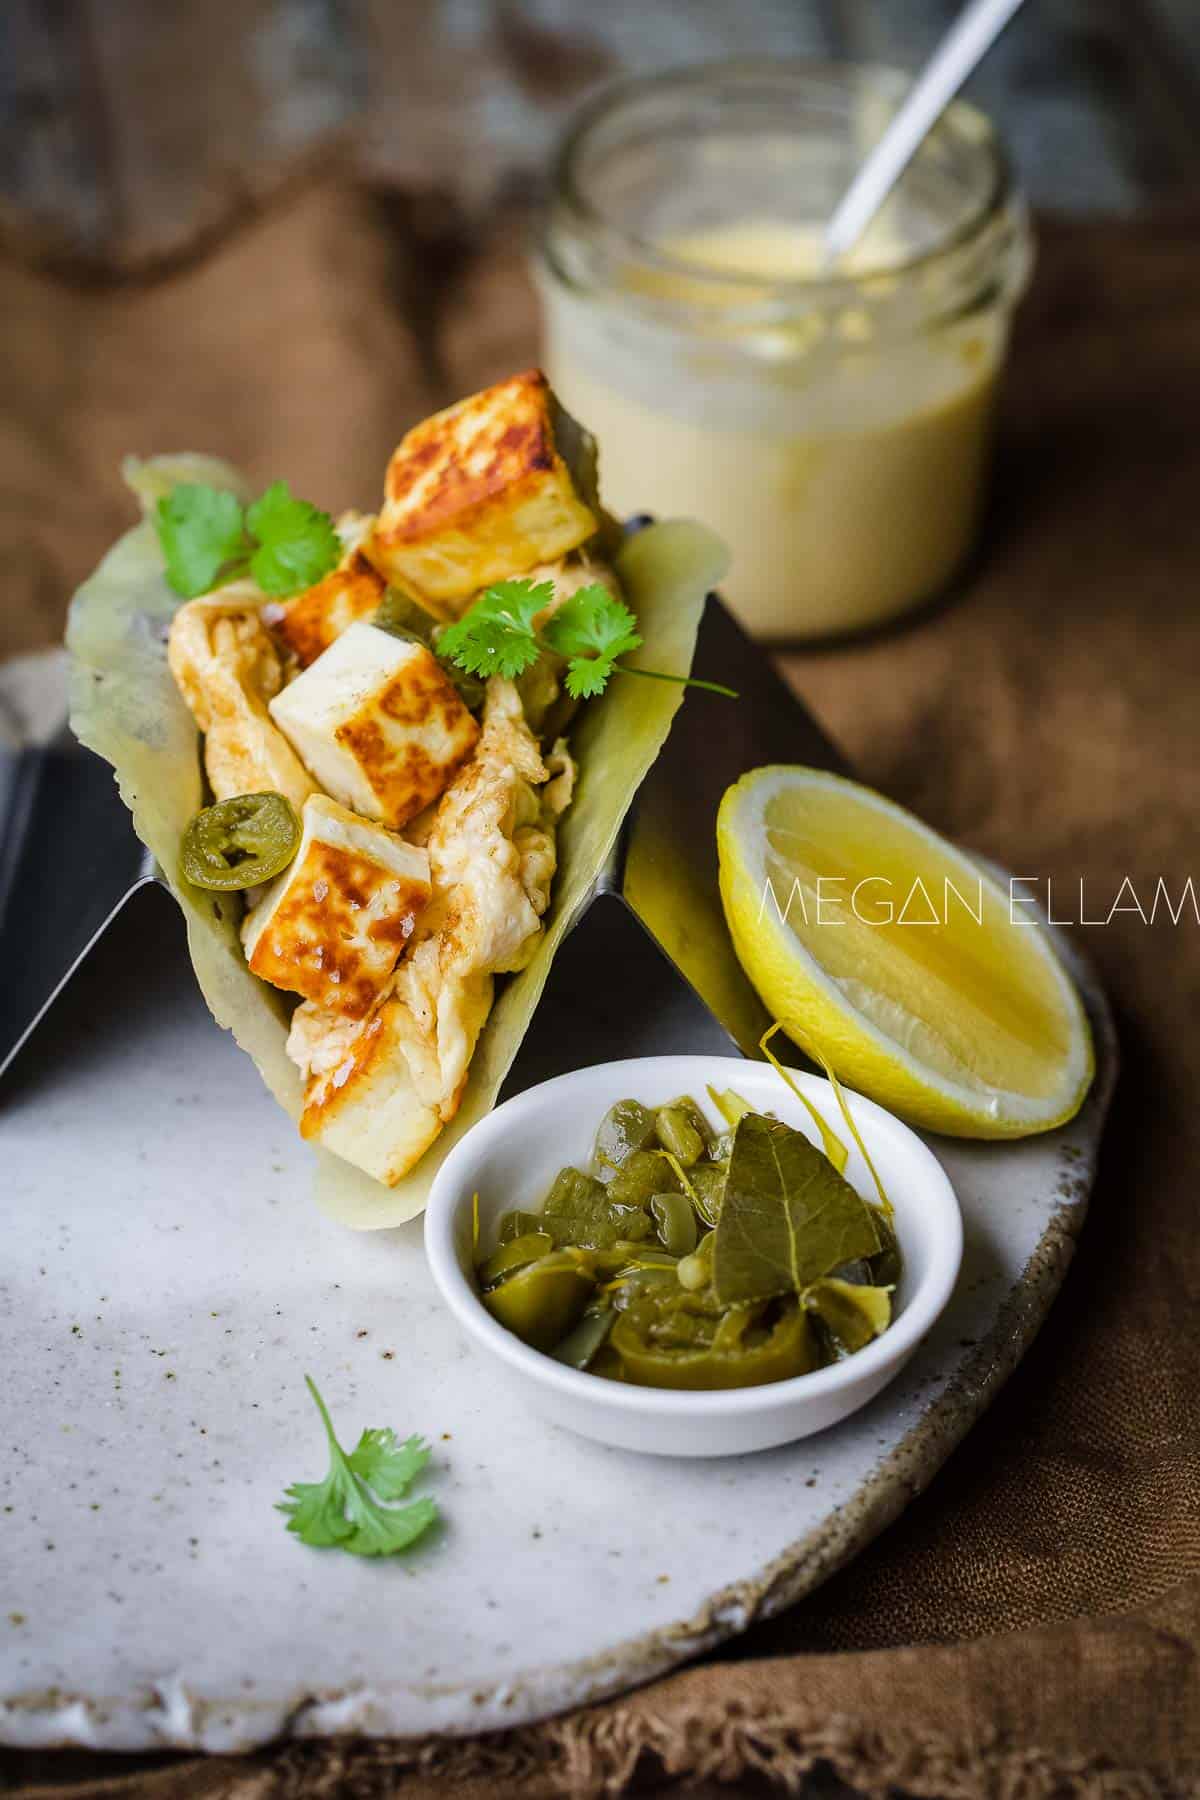 A soft cheese taco filled with eggs and haloumi.